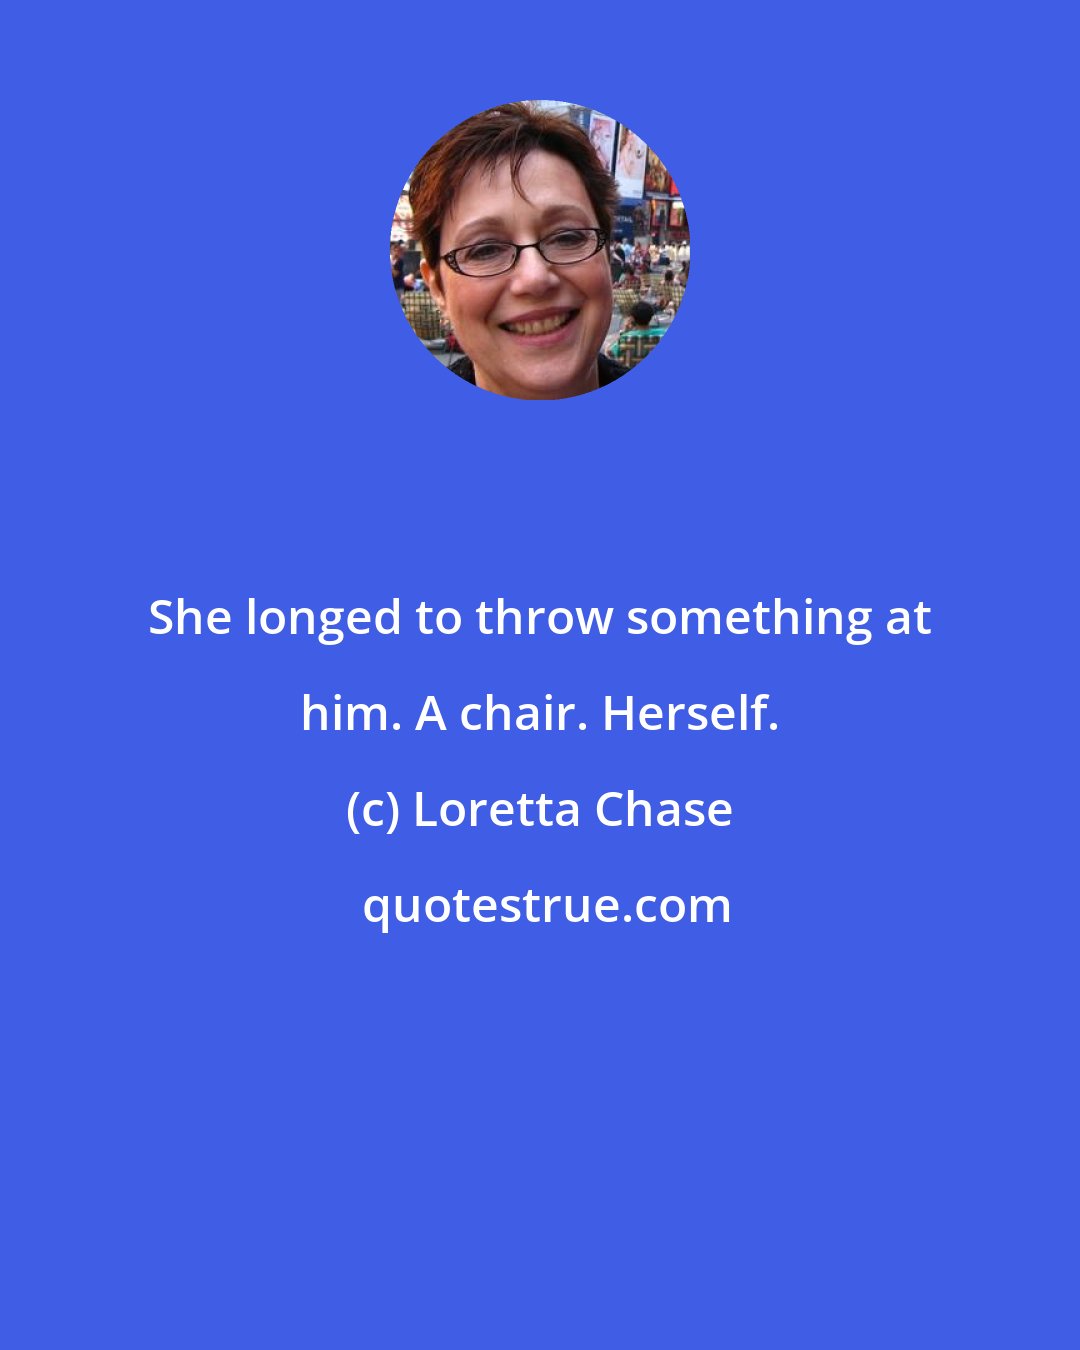 Loretta Chase: She longed to throw something at him. A chair. Herself.